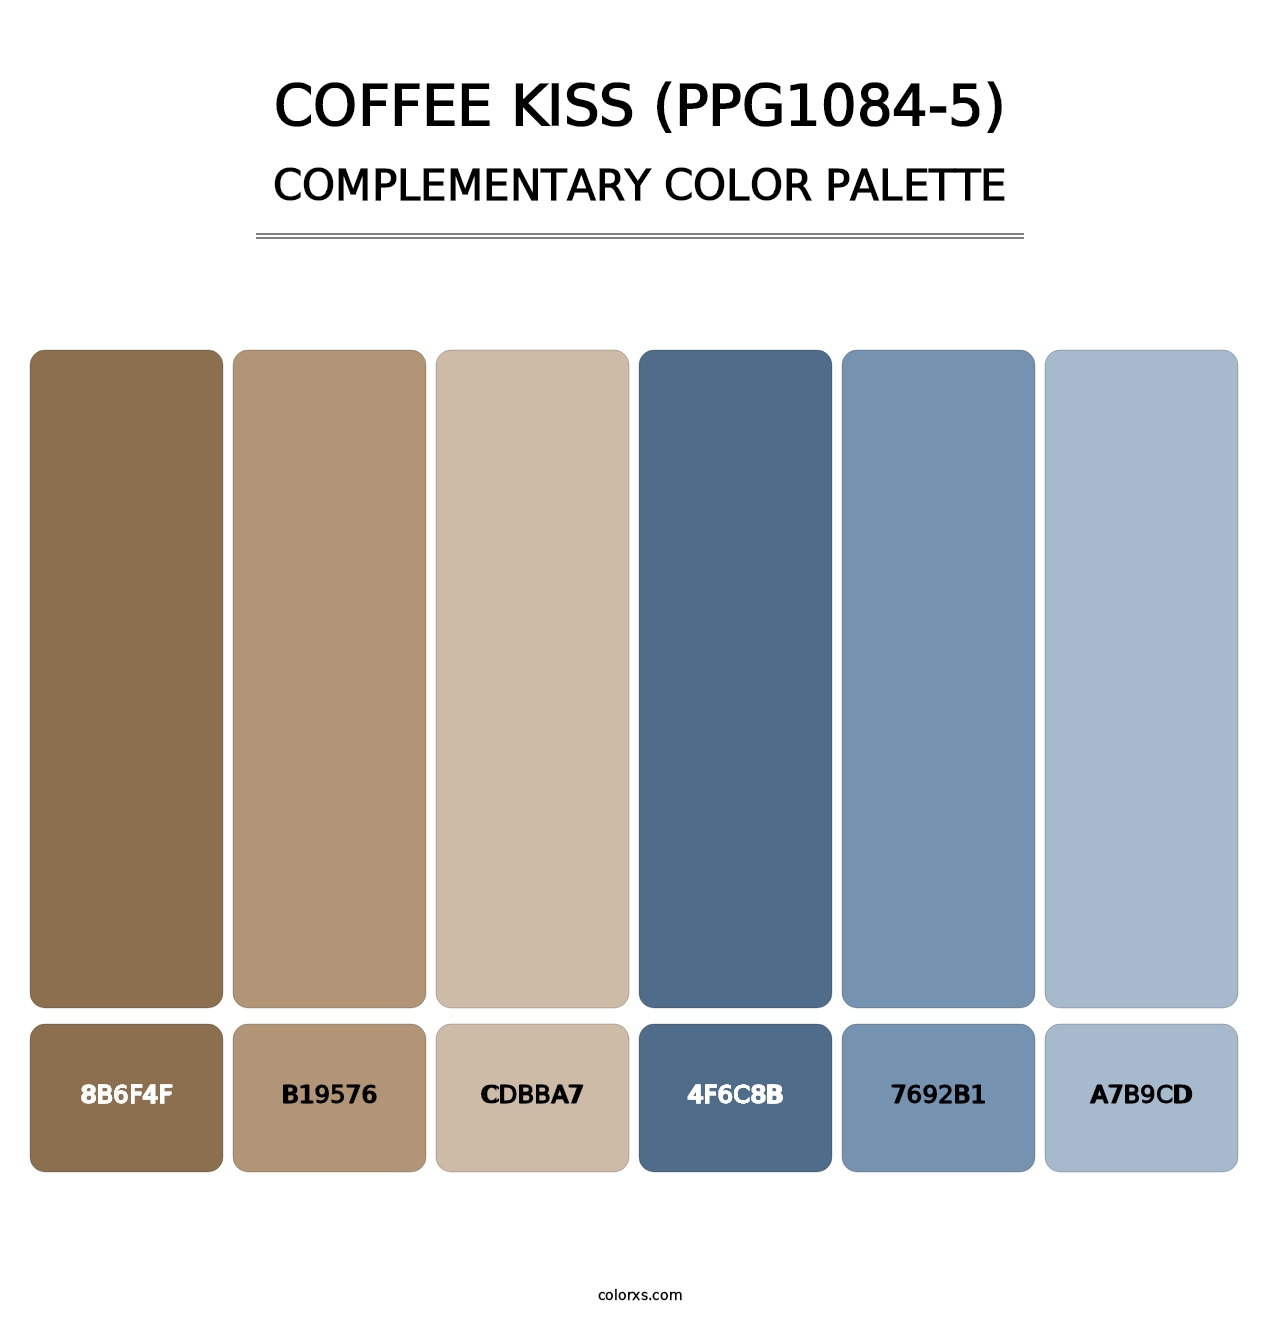 Coffee Kiss (PPG1084-5) - Complementary Color Palette